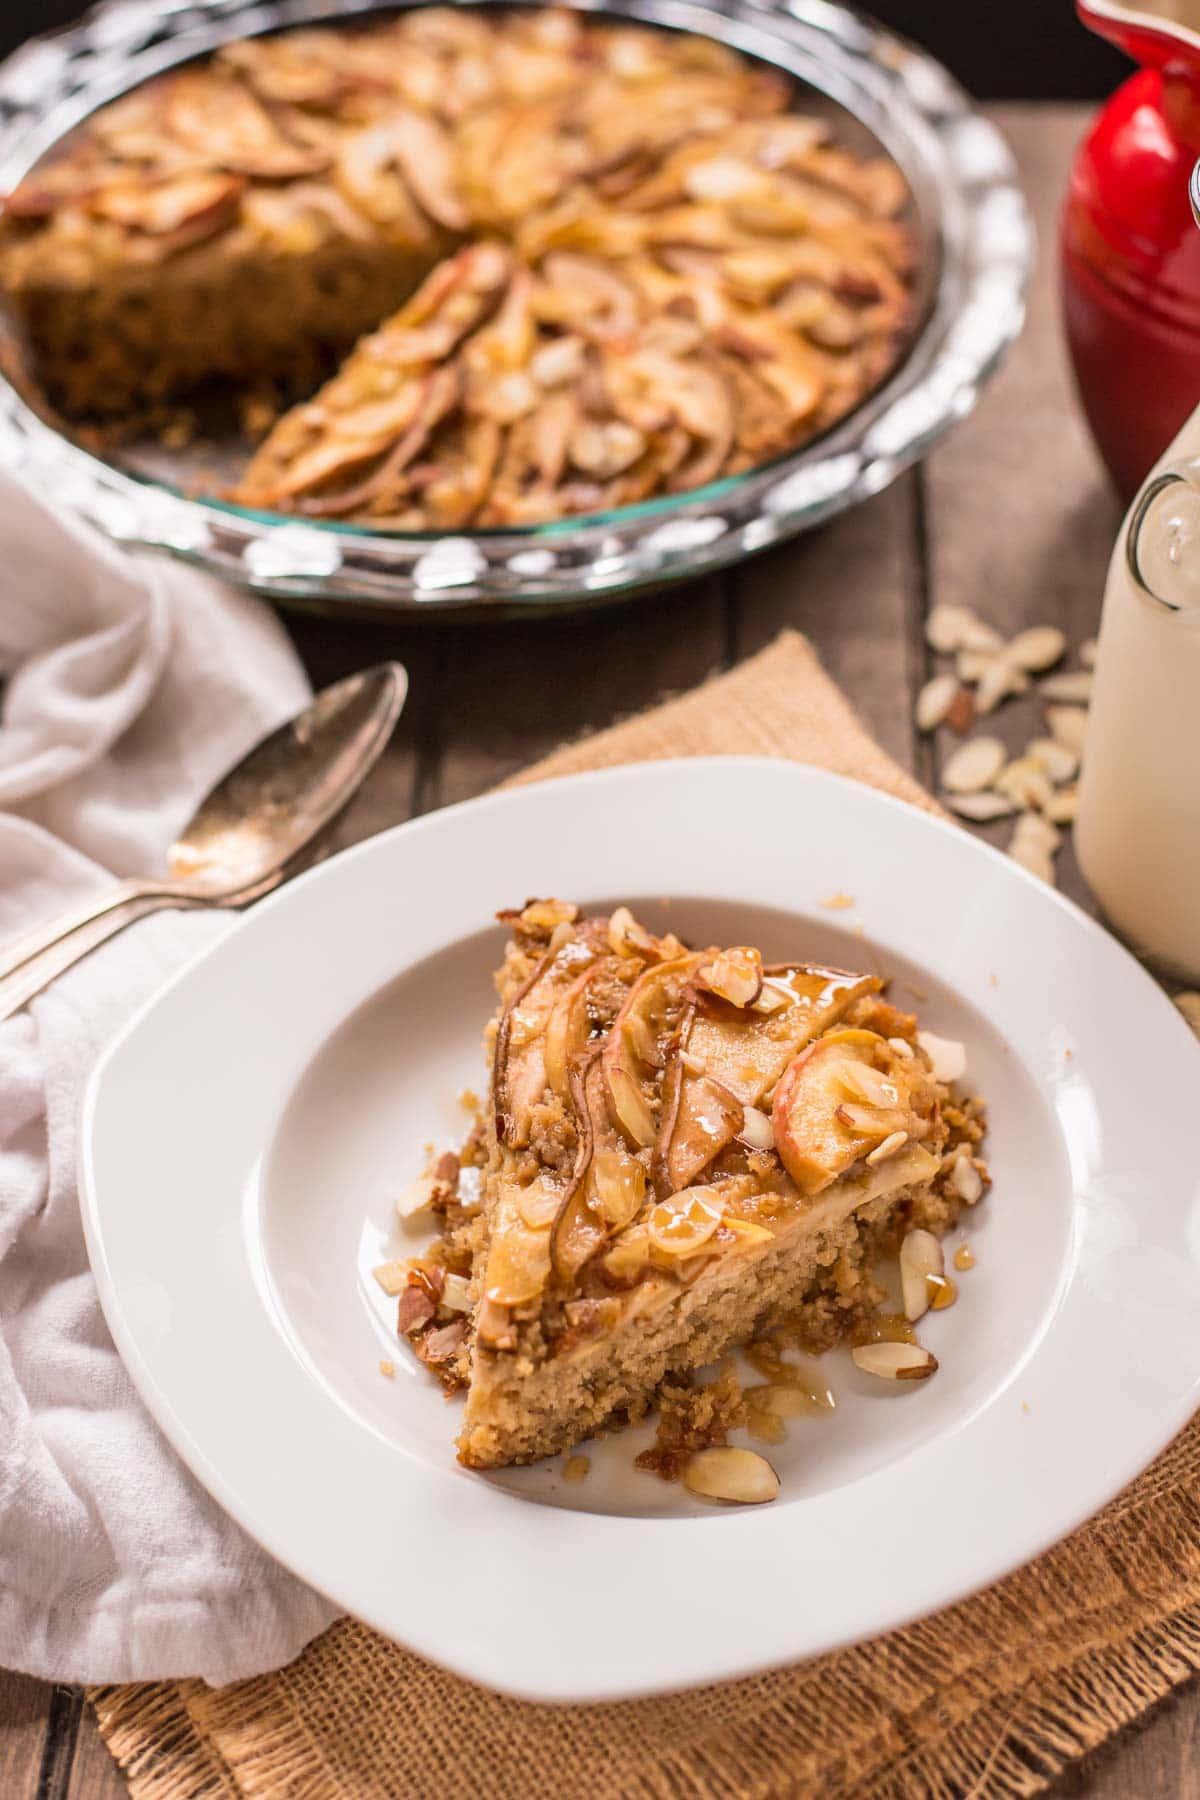 Amish Baked Oatmeal topped with apples, pears, and almonds is the ultimate warm, hearty breakfast.